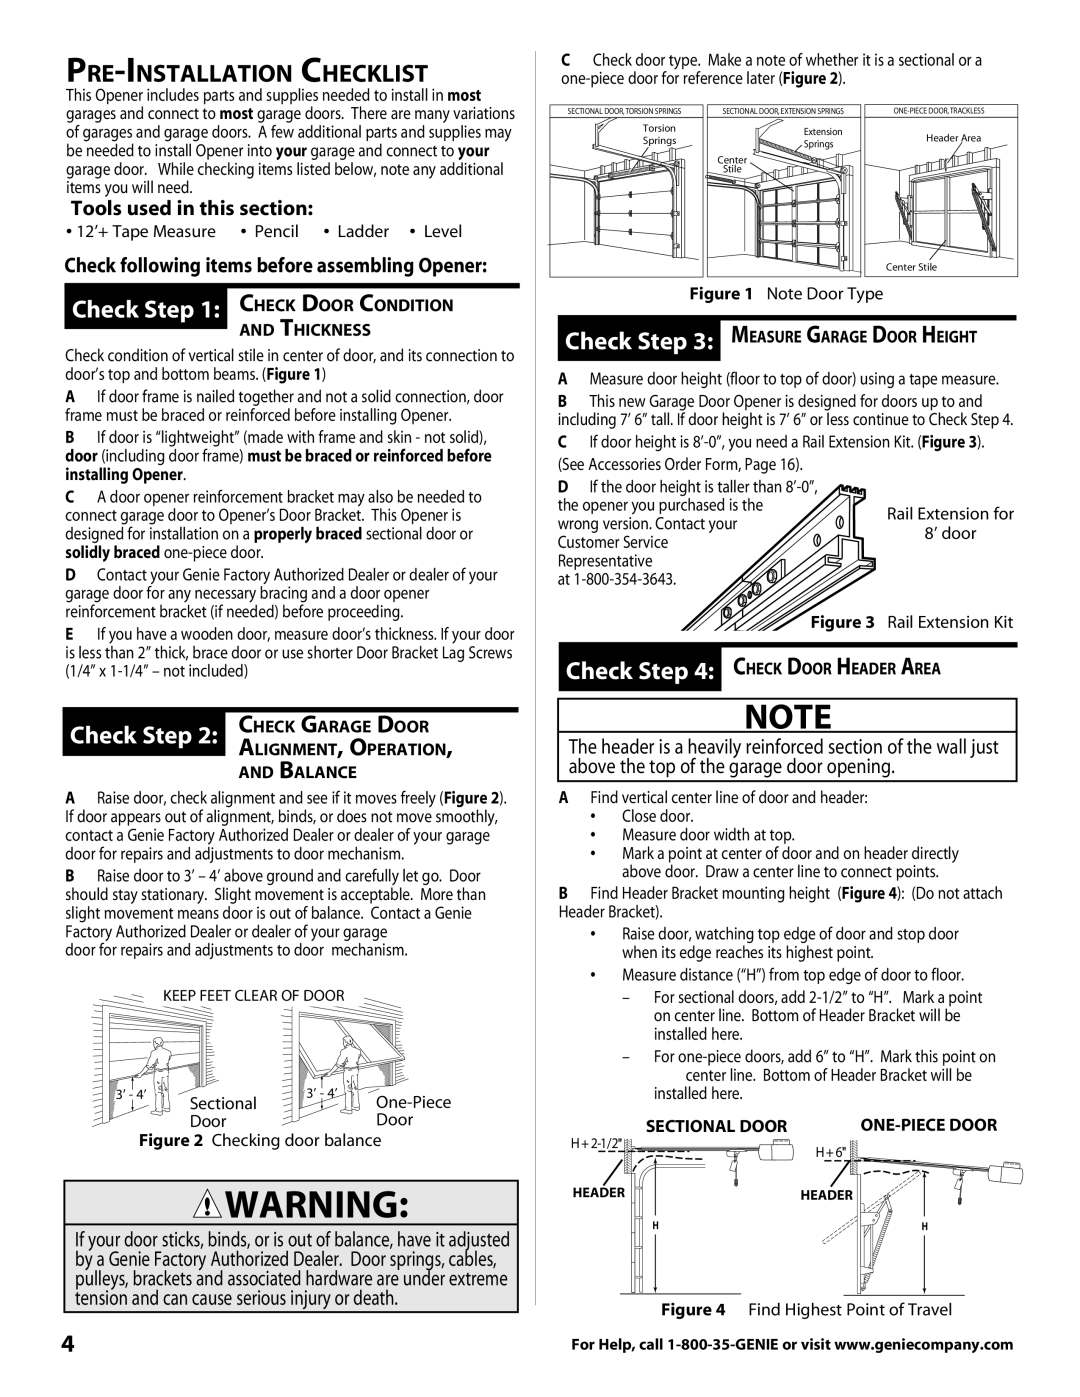 Genie 3681036666 Pre-Installation Checklist, Check Check Garage Door, Tools used in this section, installing Opener 